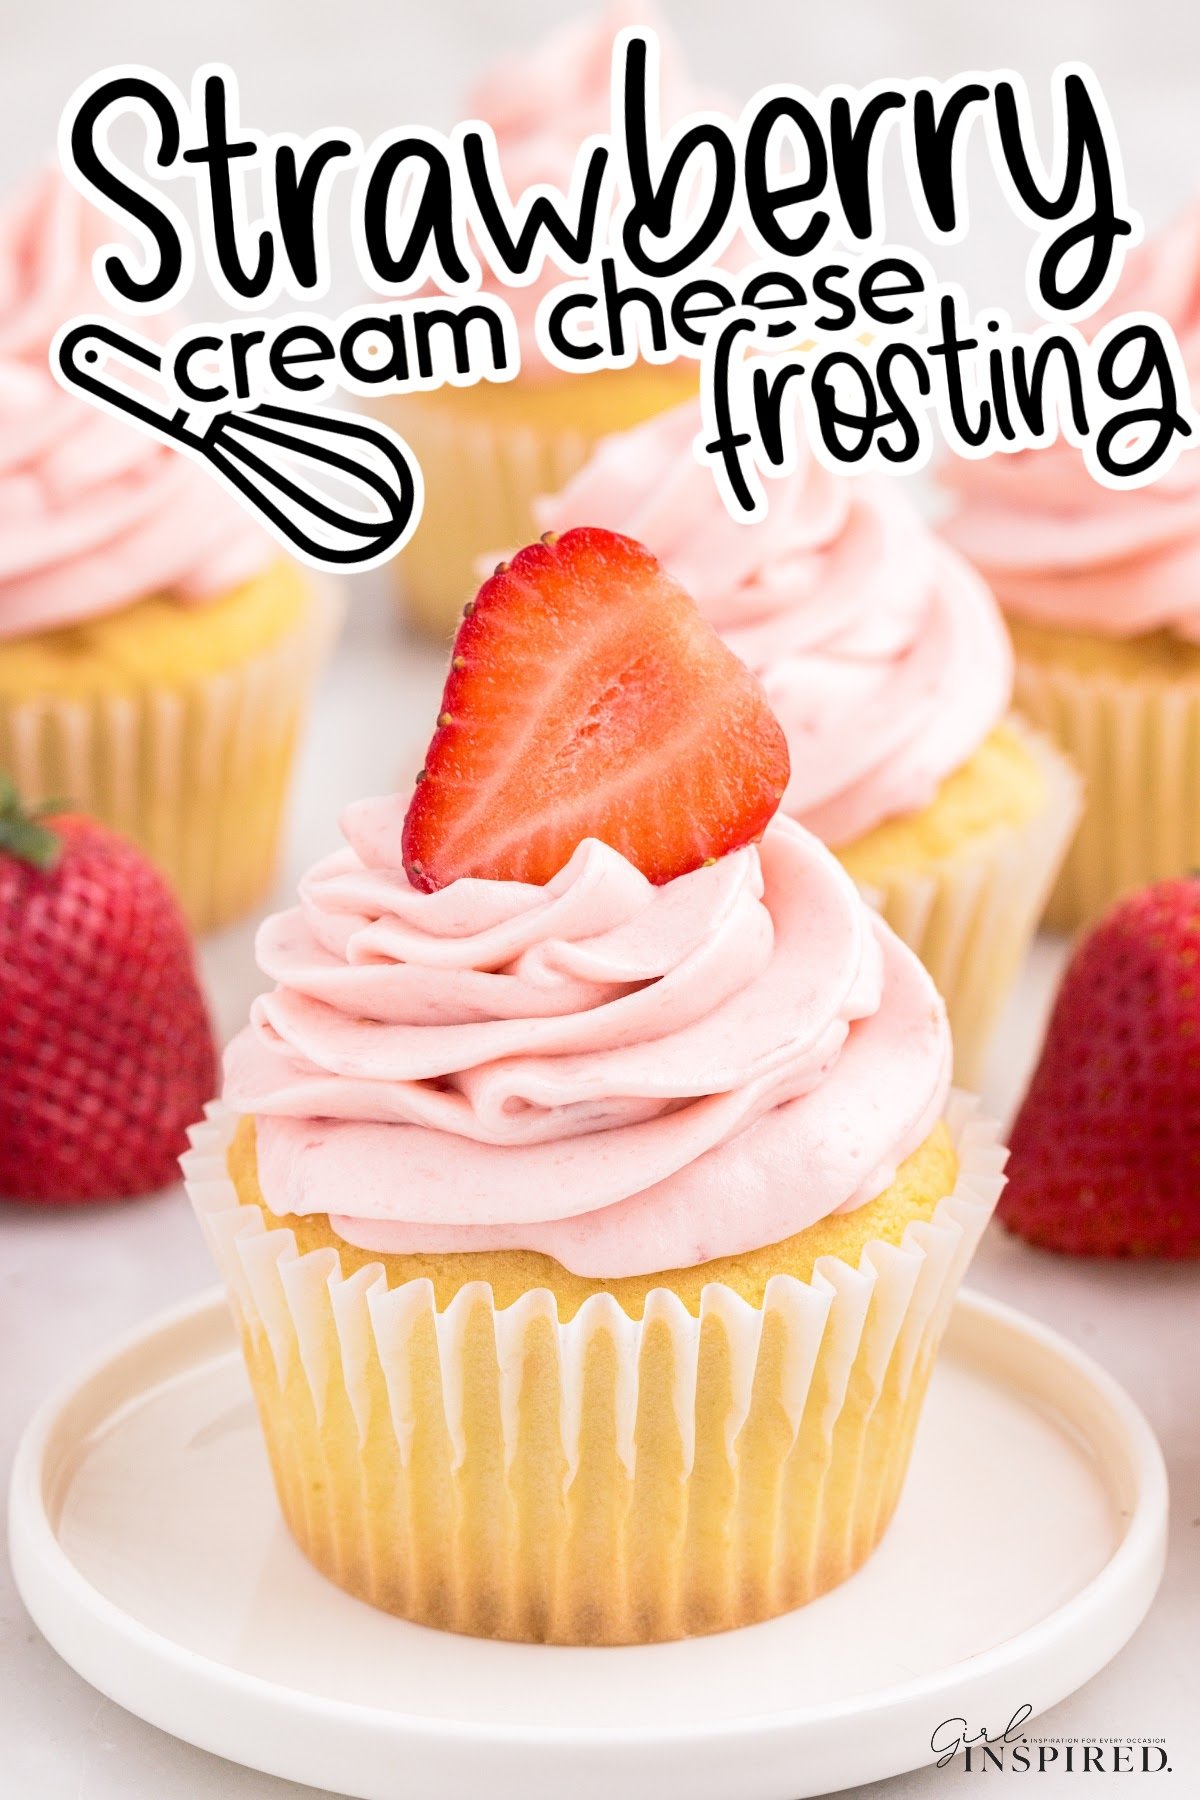 Yellow cupcake on small plate topped with strawberry cream cheese frosting and a half strawberry, with text overlay "Strawberry cream cheese frosting."